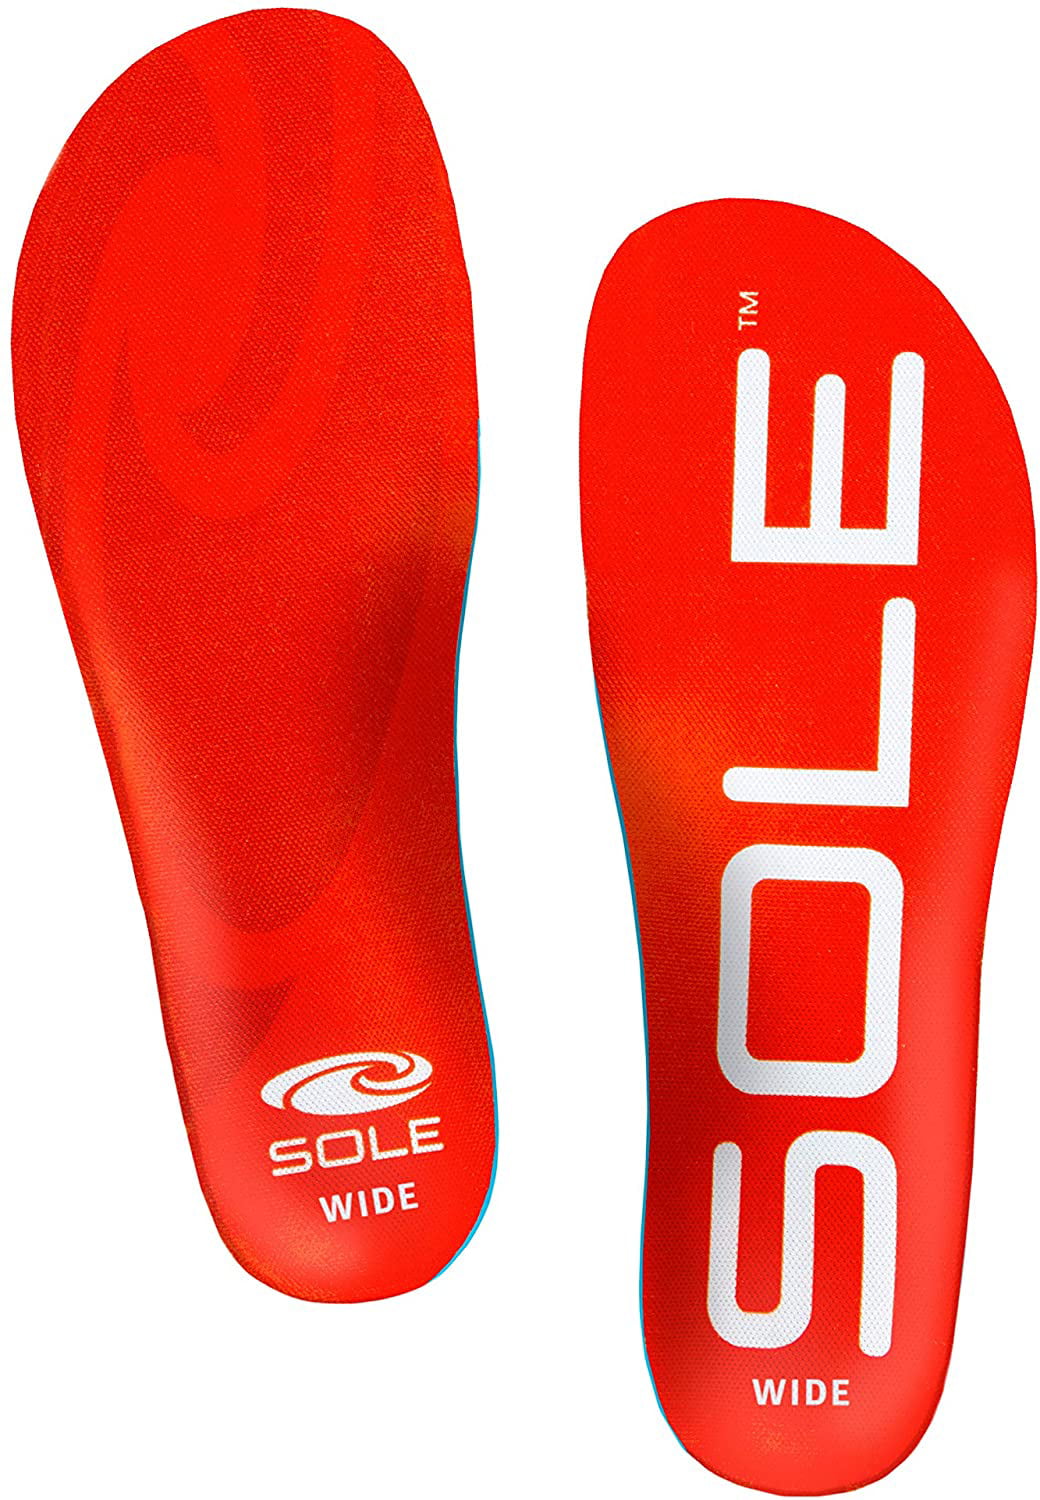 size 4 insoles